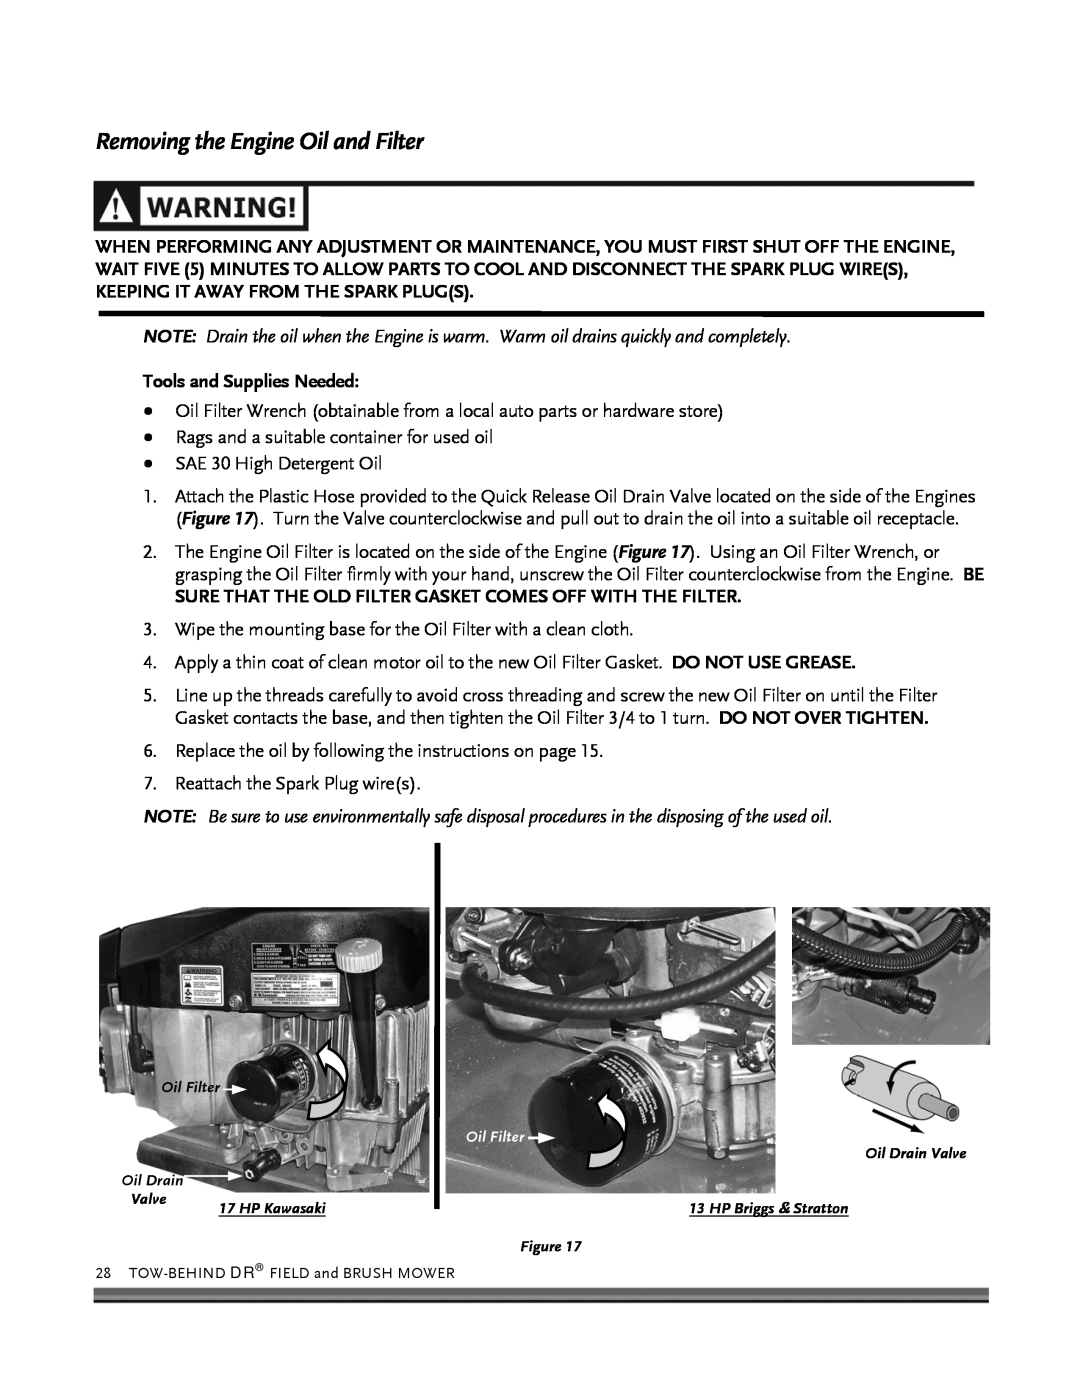 Briggs & Stratton FIELD and BRUSH MOWER manual Removing the Engine Oil and Filter 